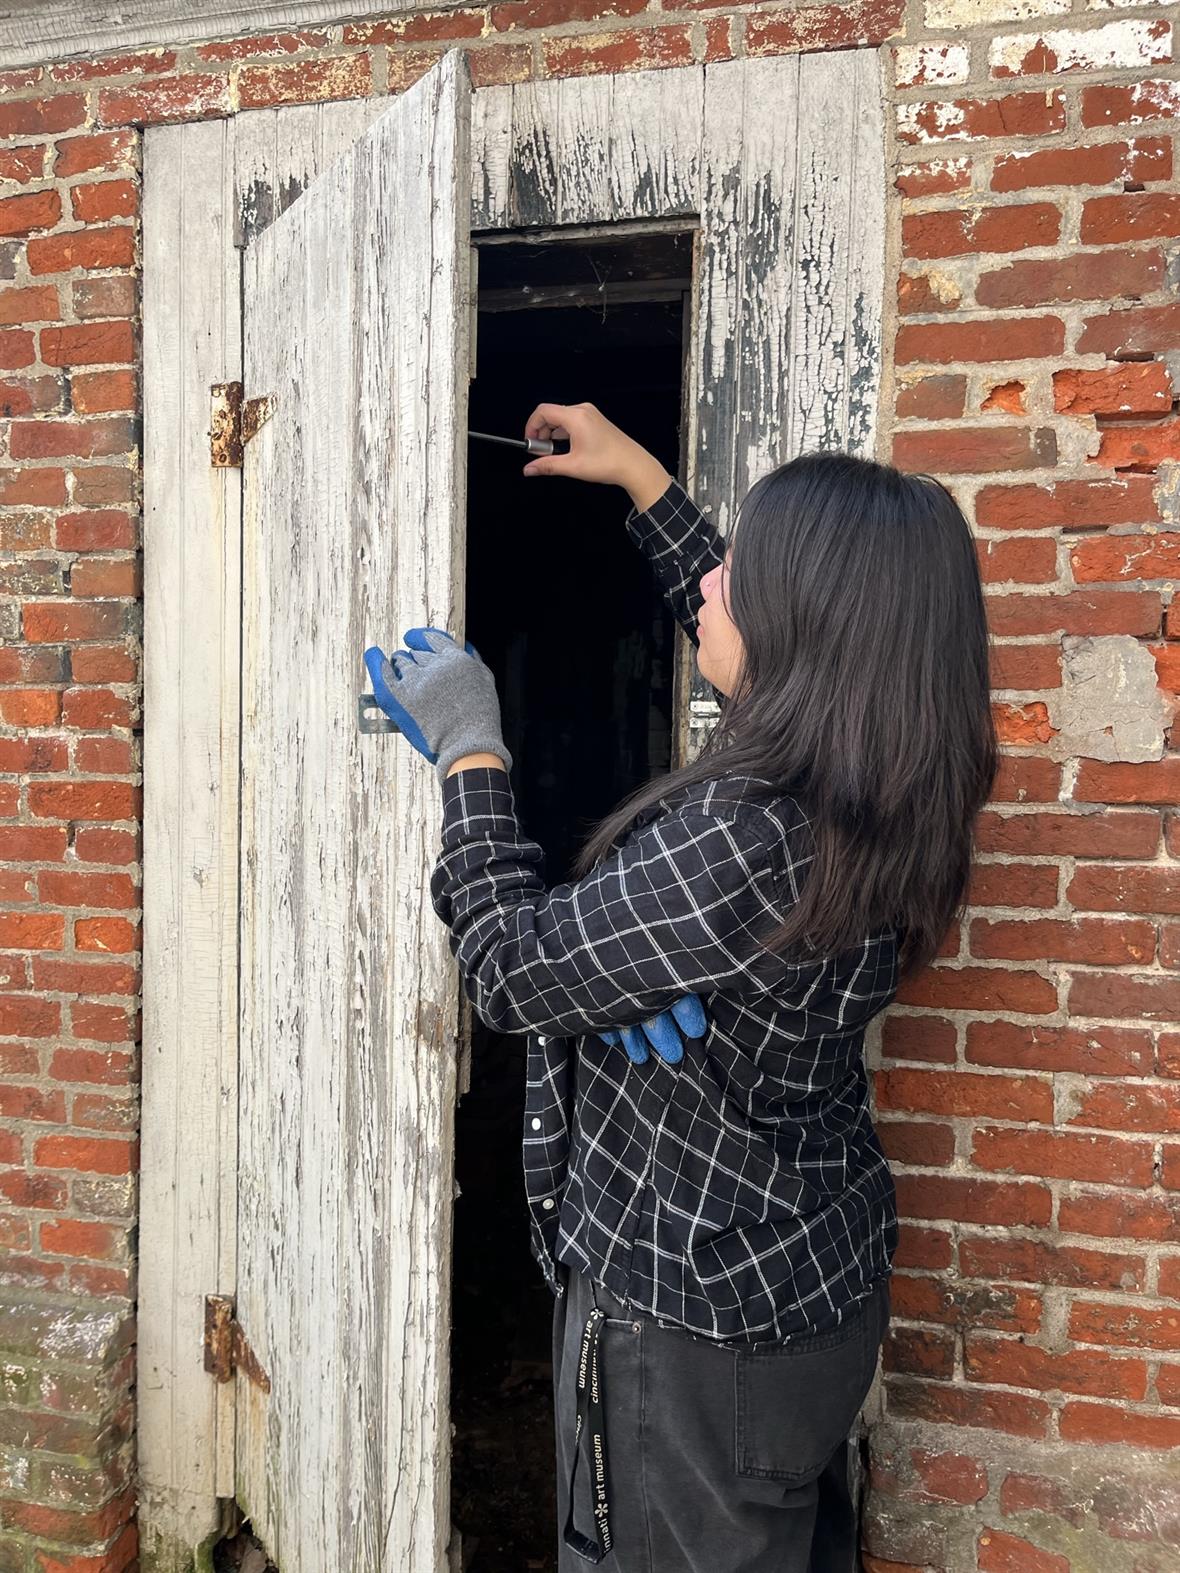 A student uses a screwdriver to fix a door hinge on an historic building.